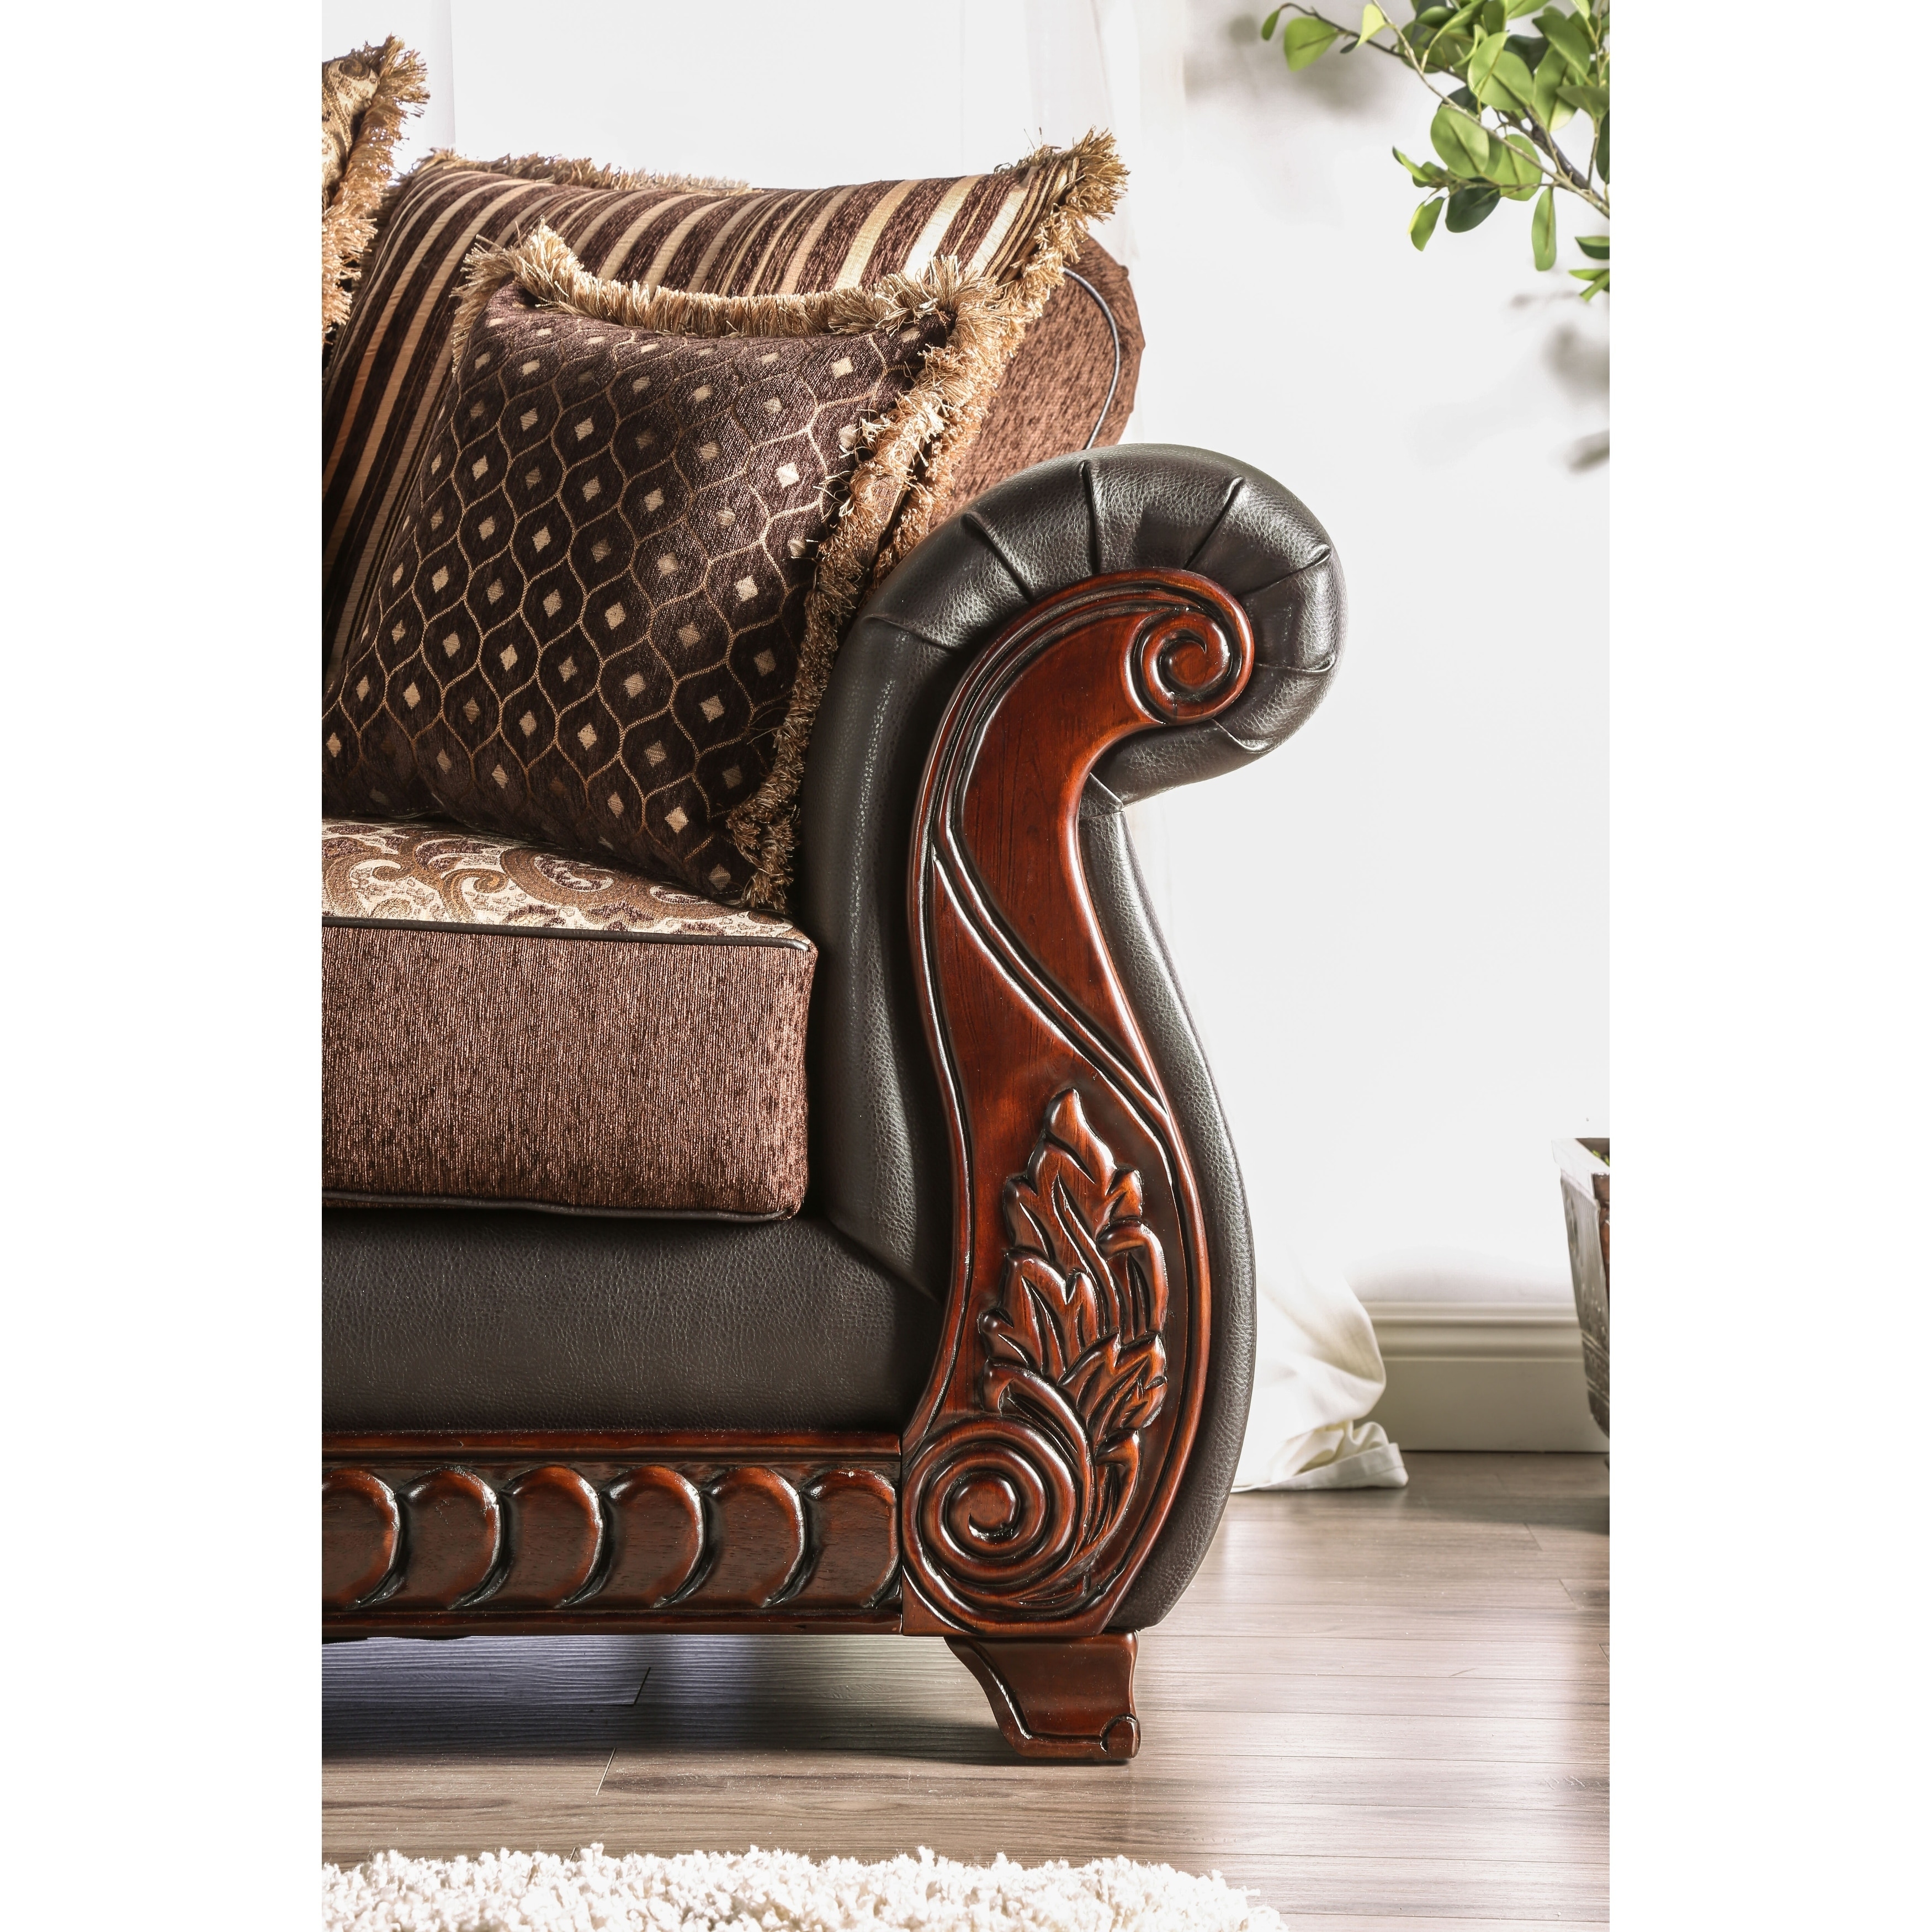 Bed Traditional Furniture - Bath On Faux Brown of & - 2-Piece - by 8942332 Leather Set America Corz Sofa Sale Beyond